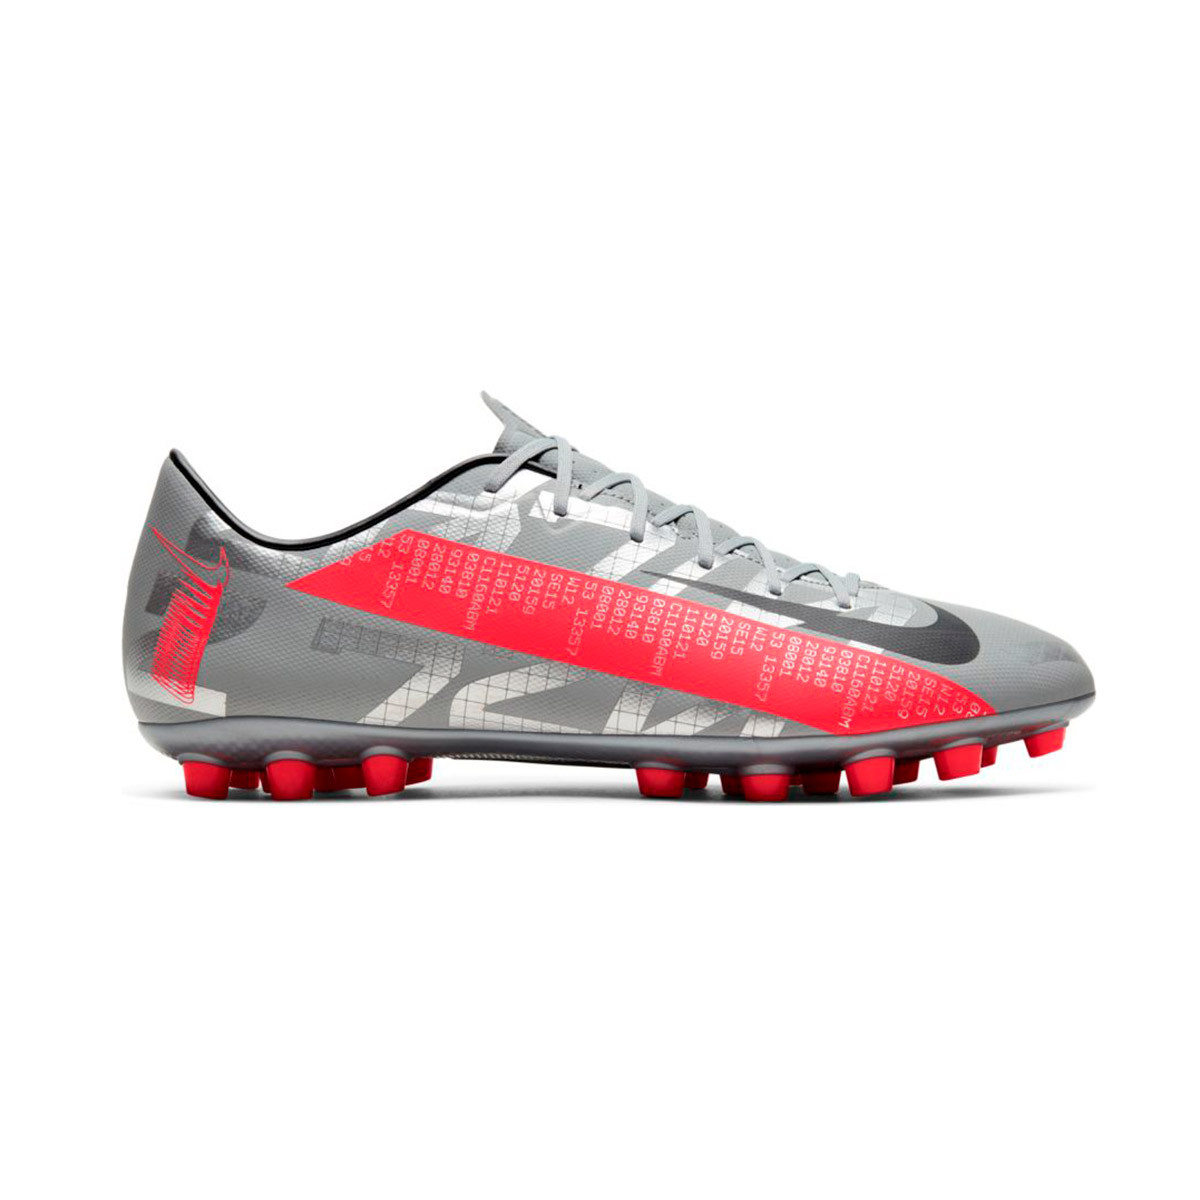 Nike Mercurial Superfly 7 Academy TF New Lights Pack.